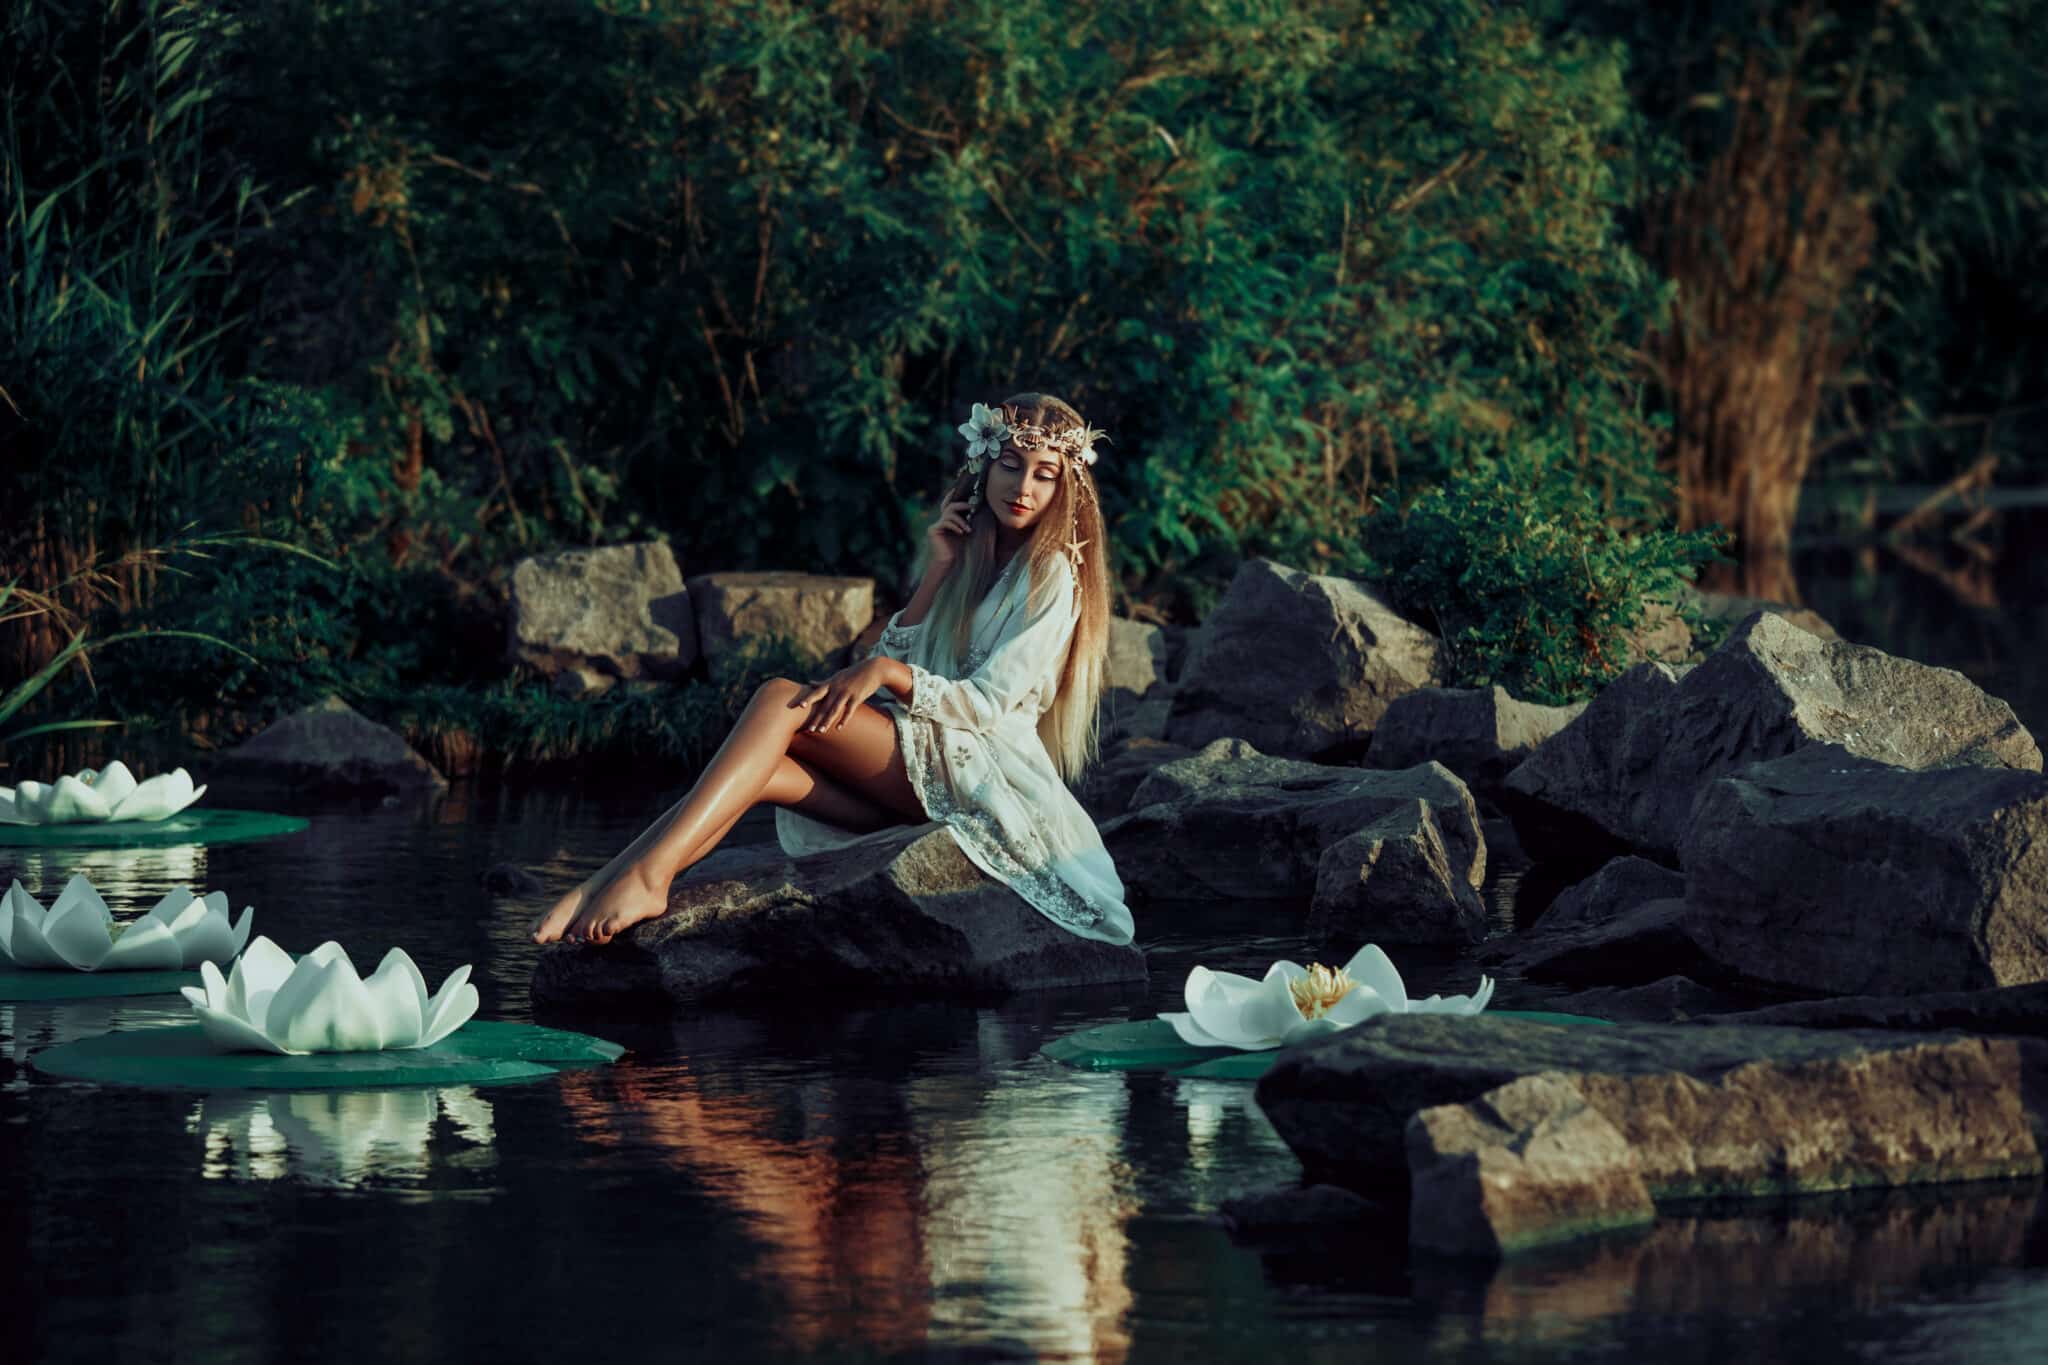 Fairy sitting on a rock in the water..Fantastic lake with big lilies. Background mysterious forest. A wreath made of shells, handmade.